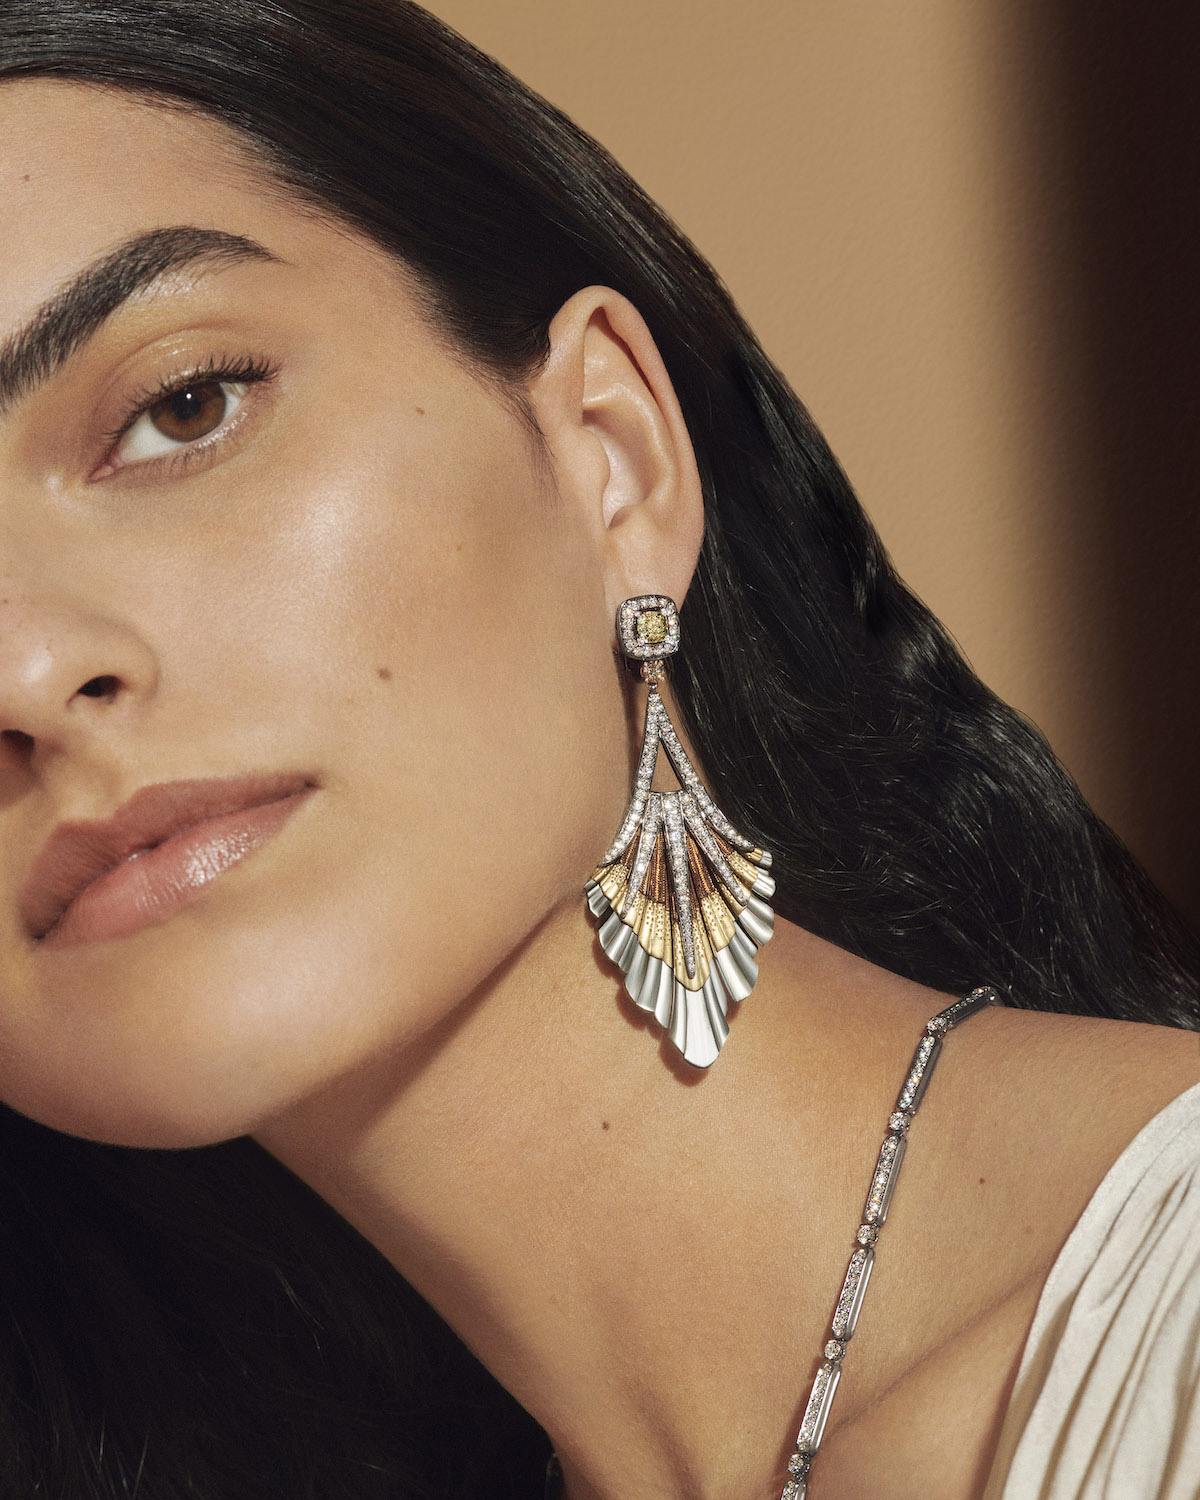 The Most Jaw-Dropping Jewels at Paris High-Jewelry Week 2022